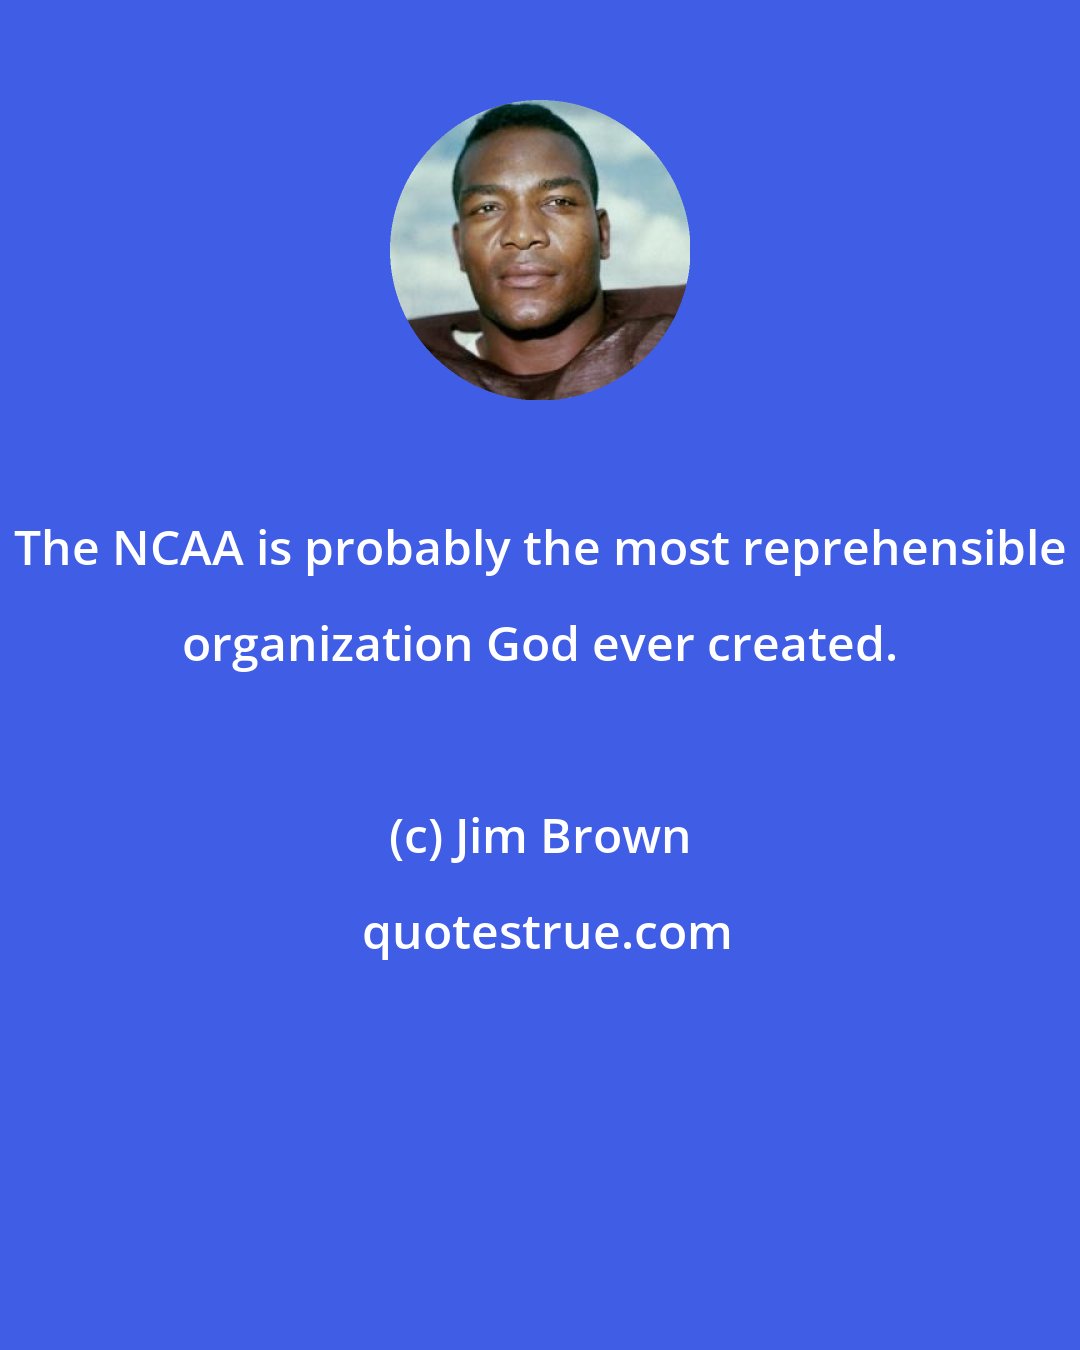 Jim Brown: The NCAA is probably the most reprehensible organization God ever created.